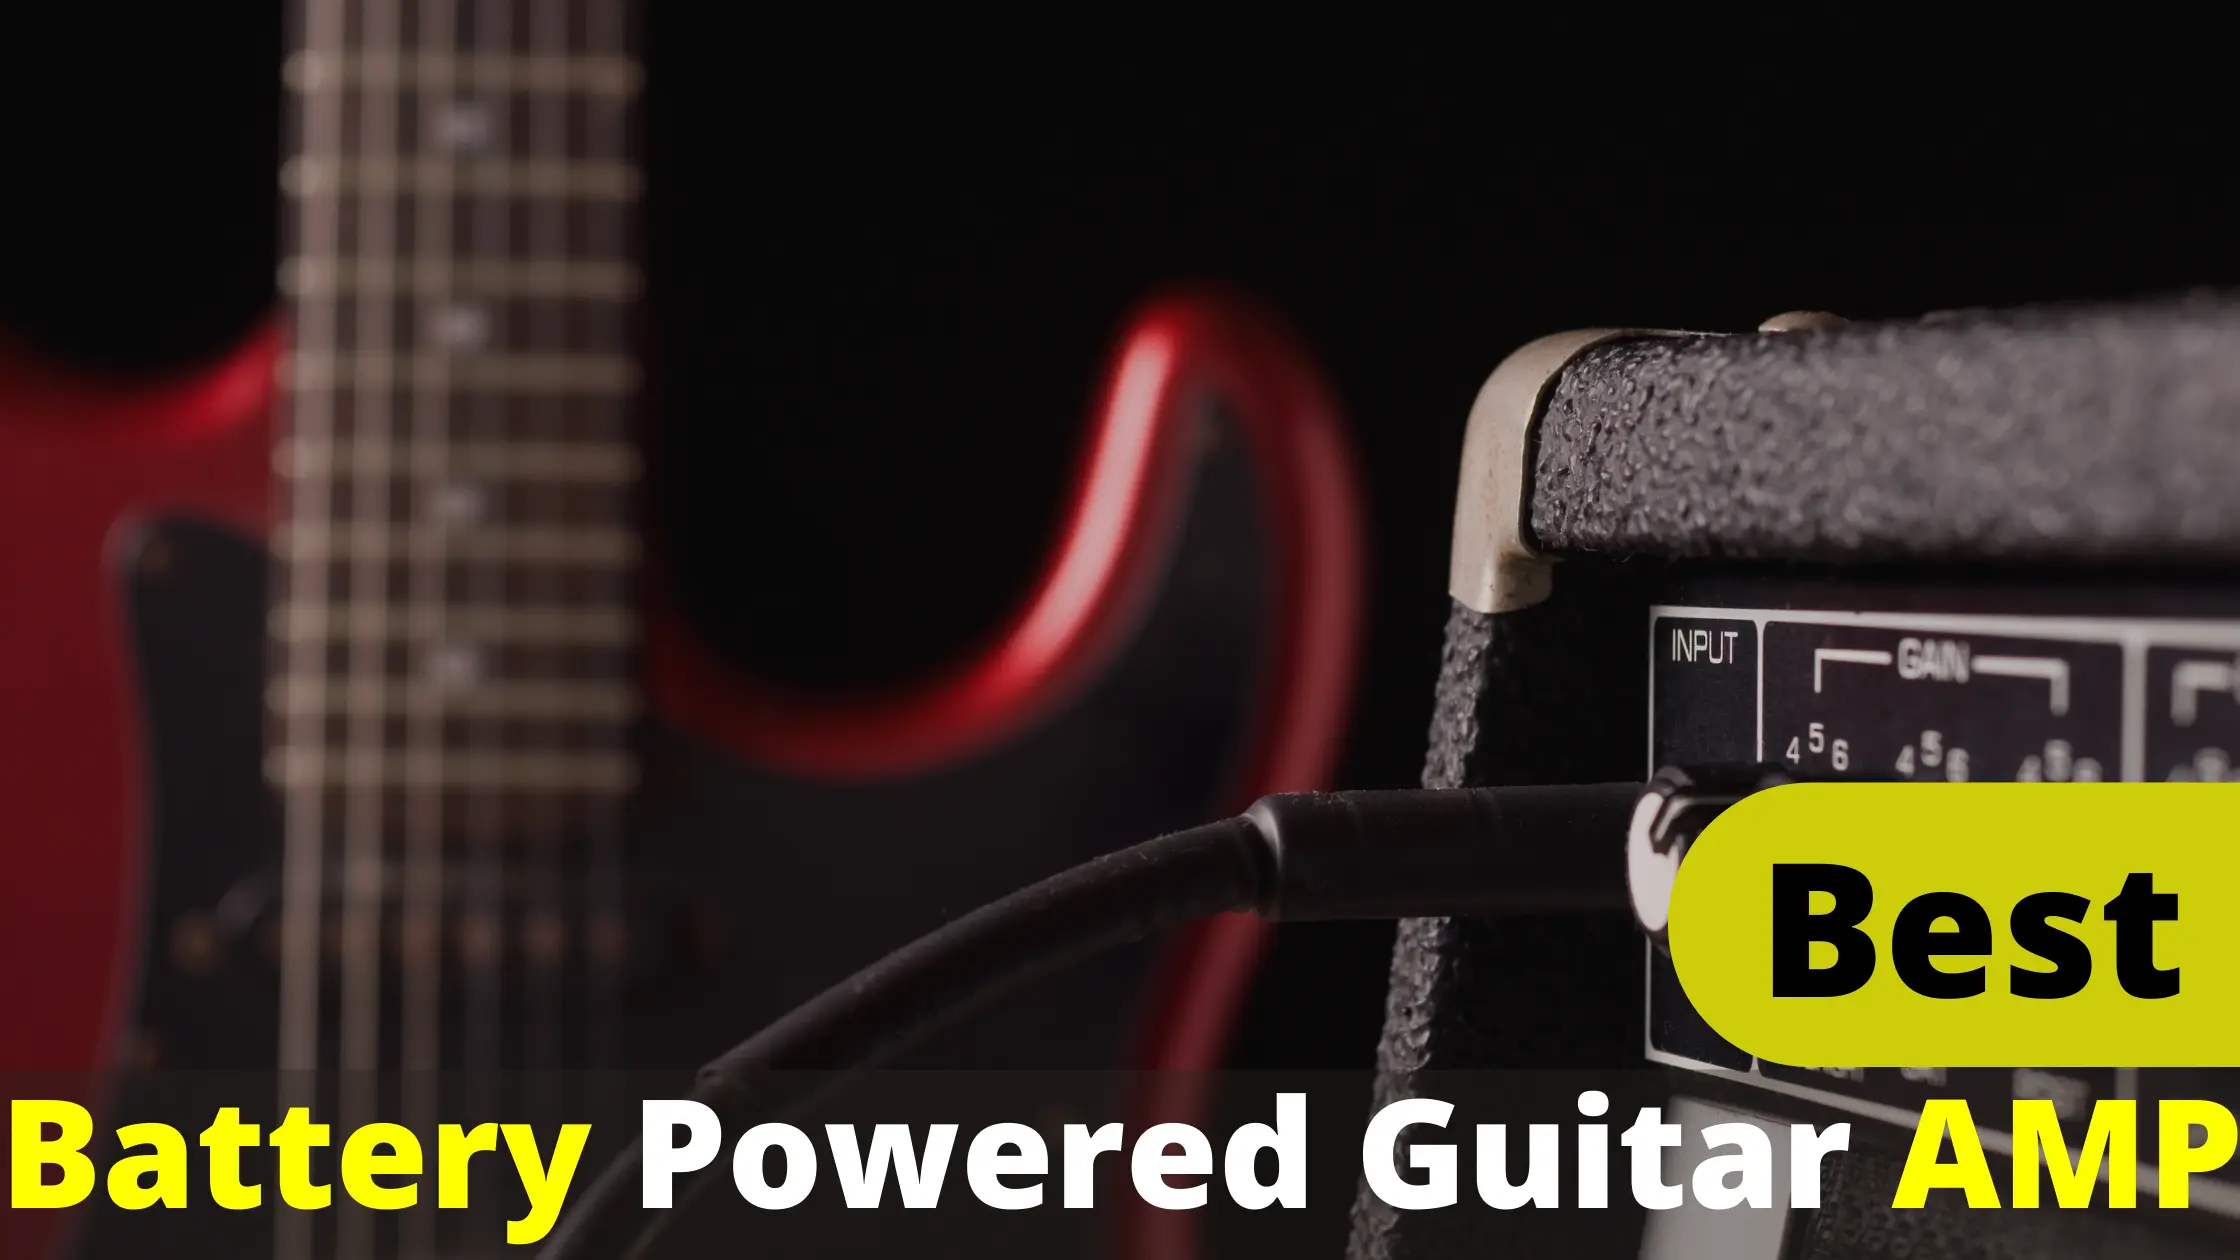 Top Picks For Best Battery Powered Guitar Amp Buying Guide